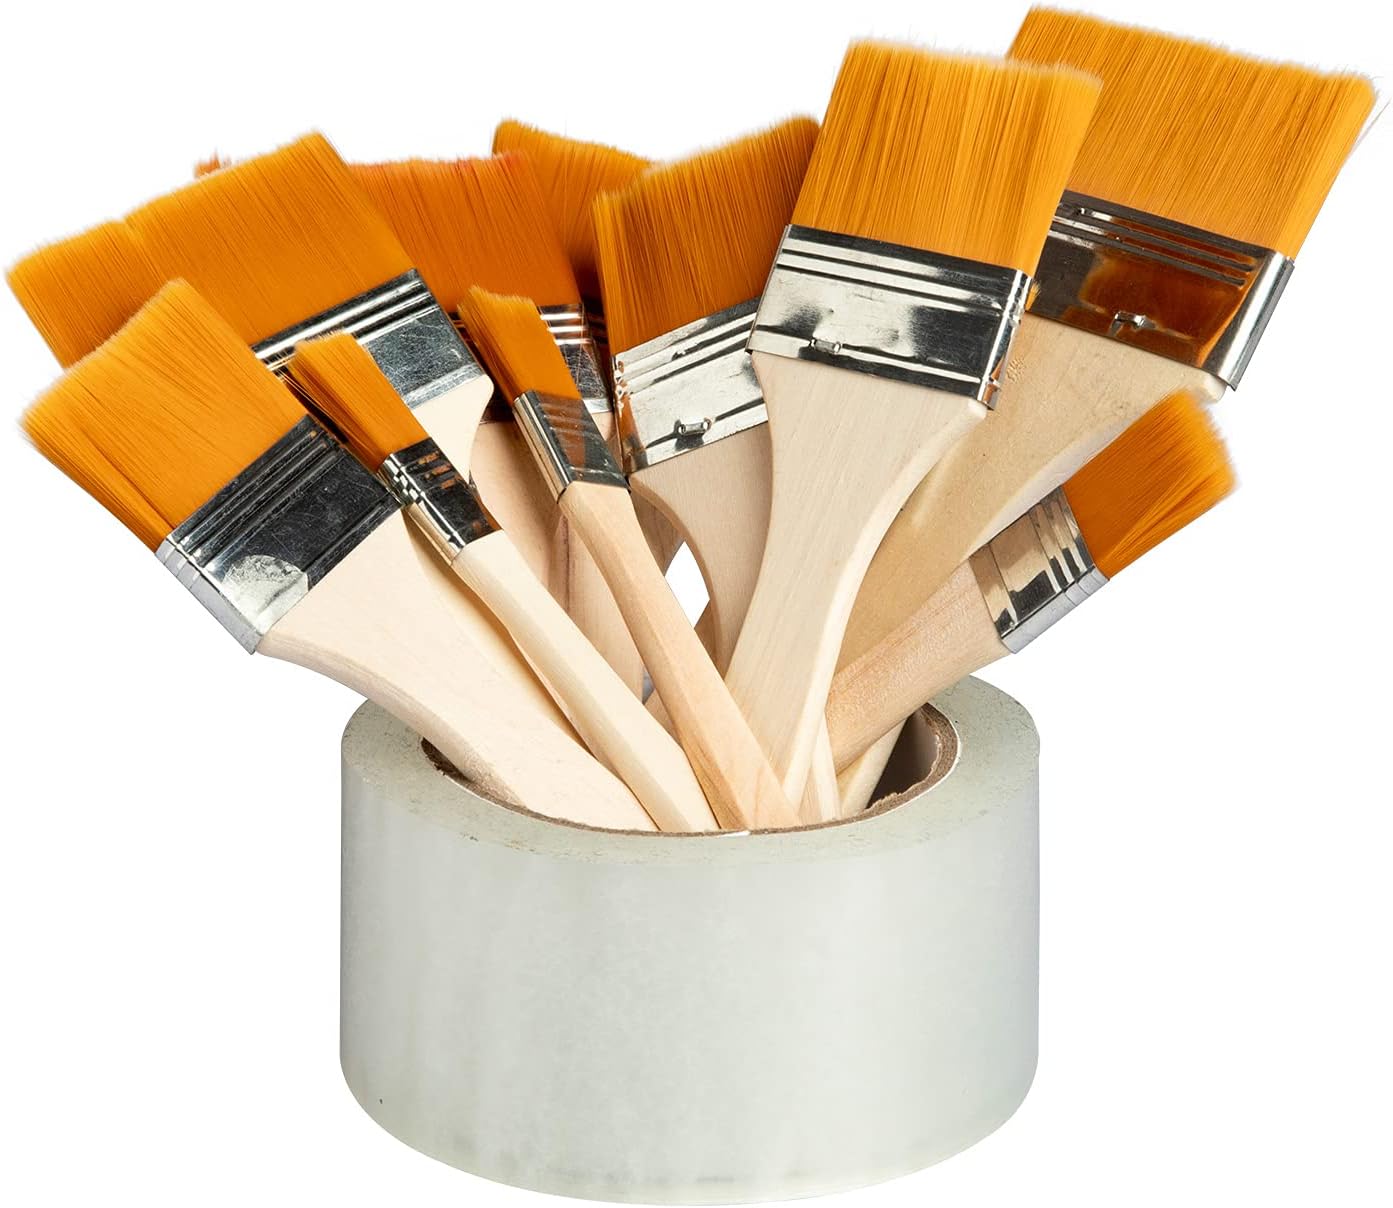 12 nylon brushes of various sizes with wooden handles (yellow)